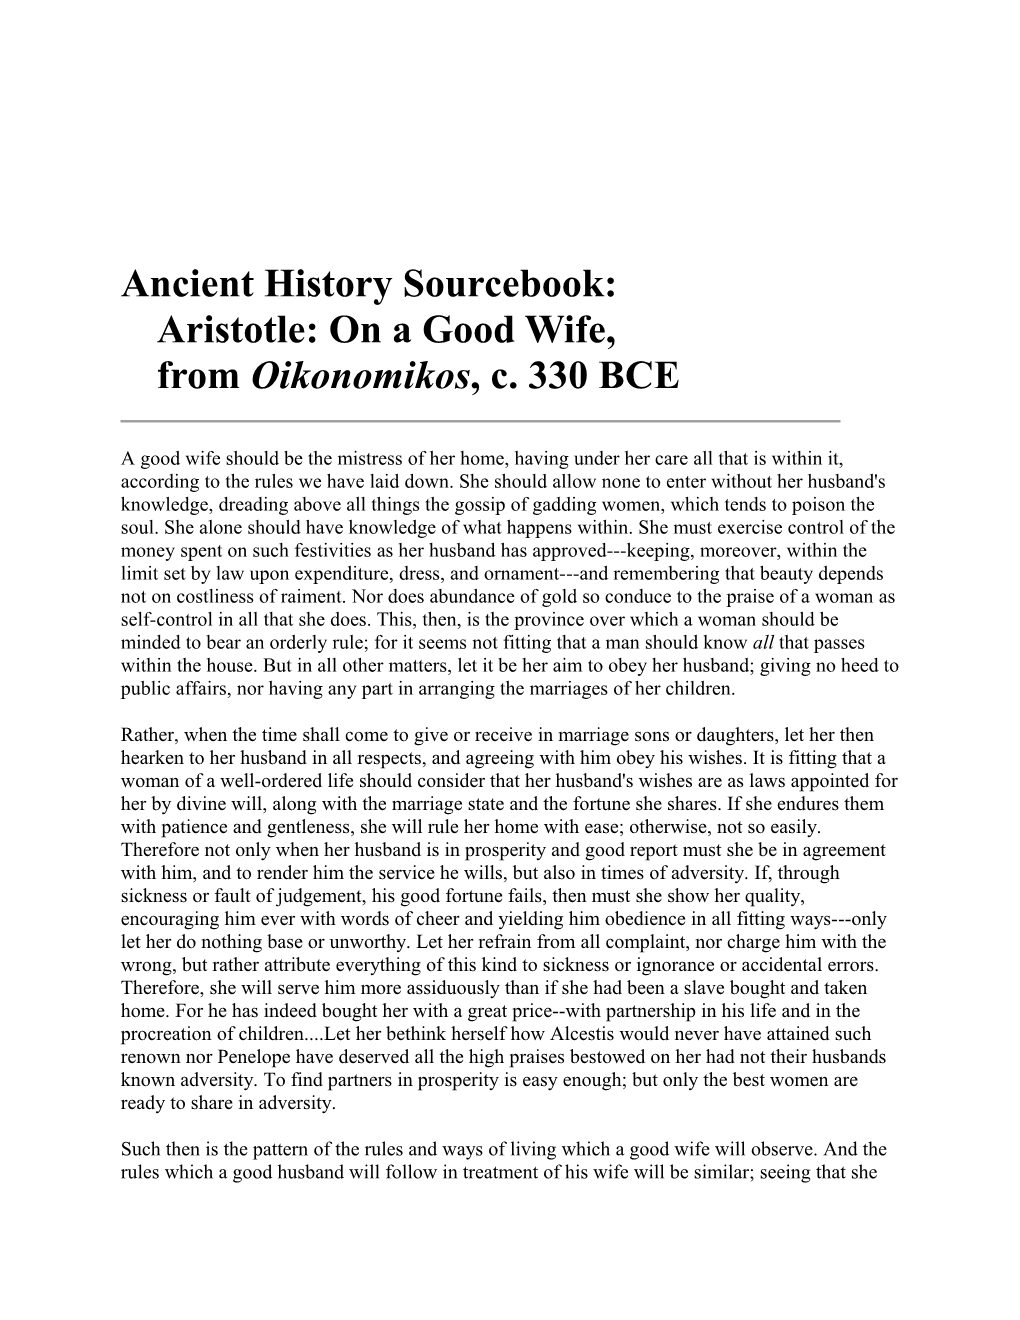 Ancient History Sourcebook: Aristotle: on a Good Wife, from Oikonomikos, C. 330 BCE